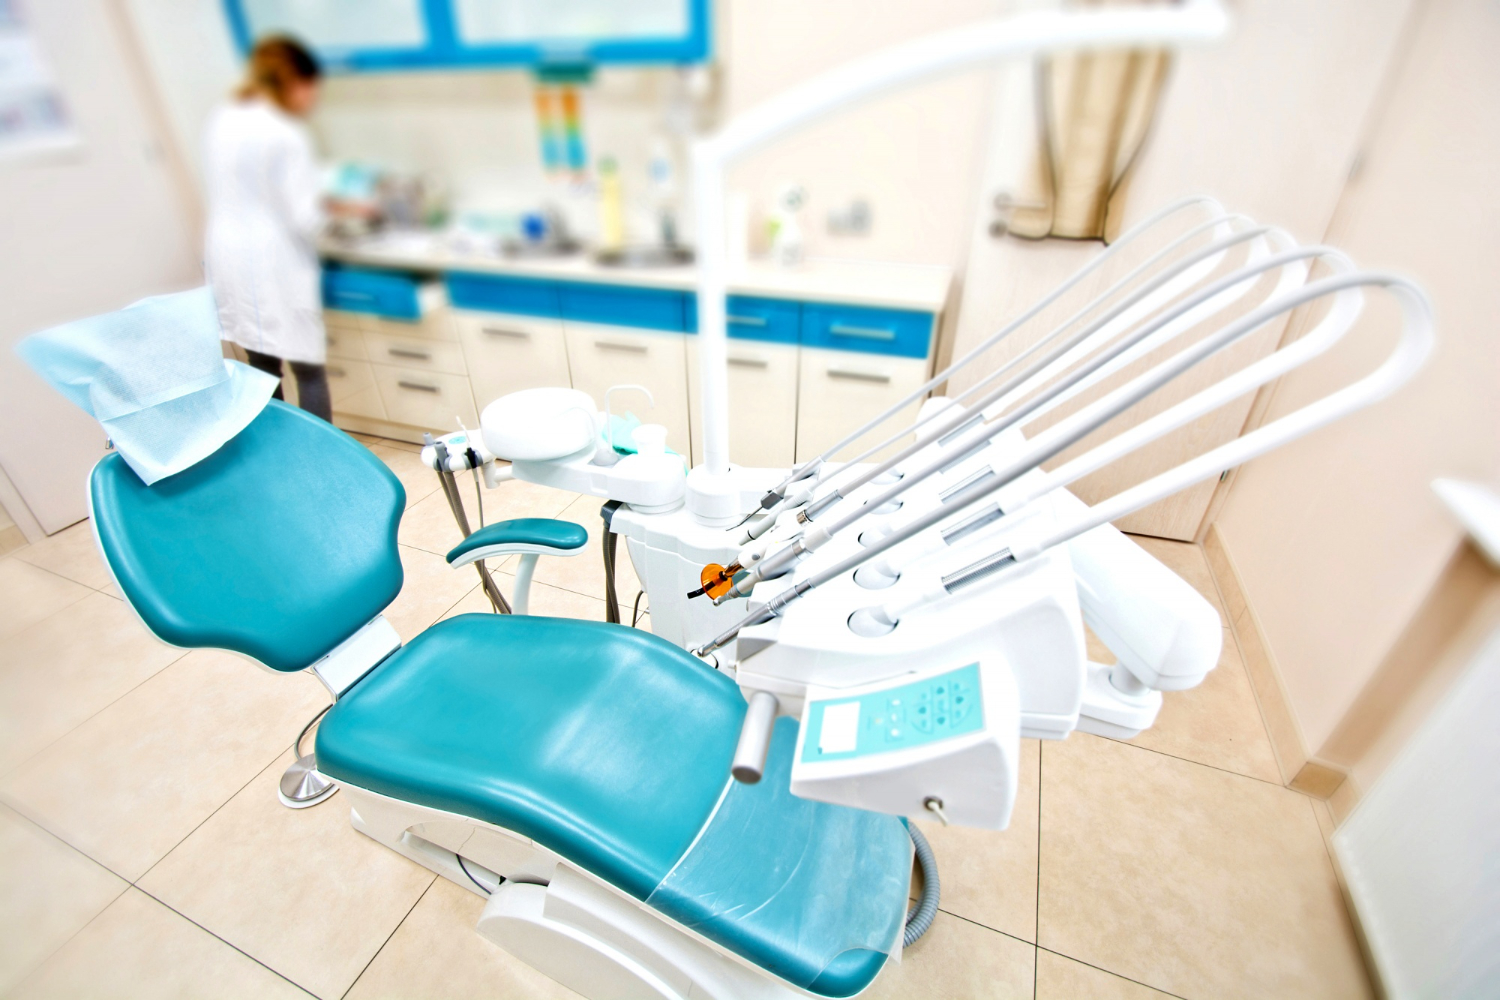 professional-dentist-tools-and-chair-in-the-dental-office